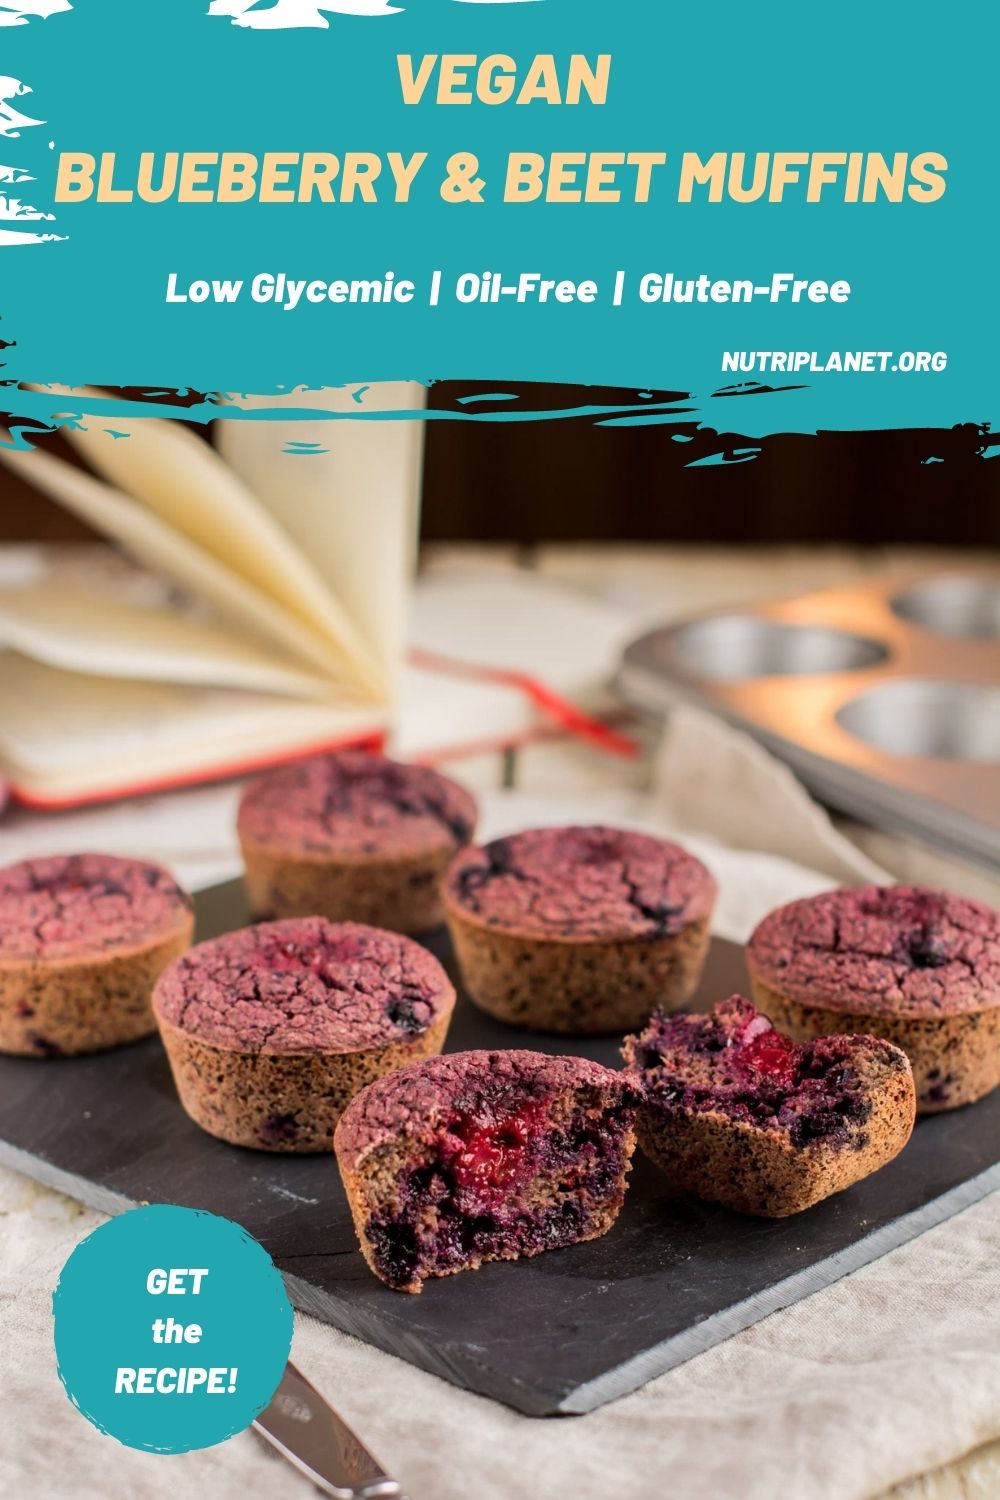 Learn how to make vegan blueberry beet muffins that are oil-free, low fat, gluten-free, and refined sugar free.